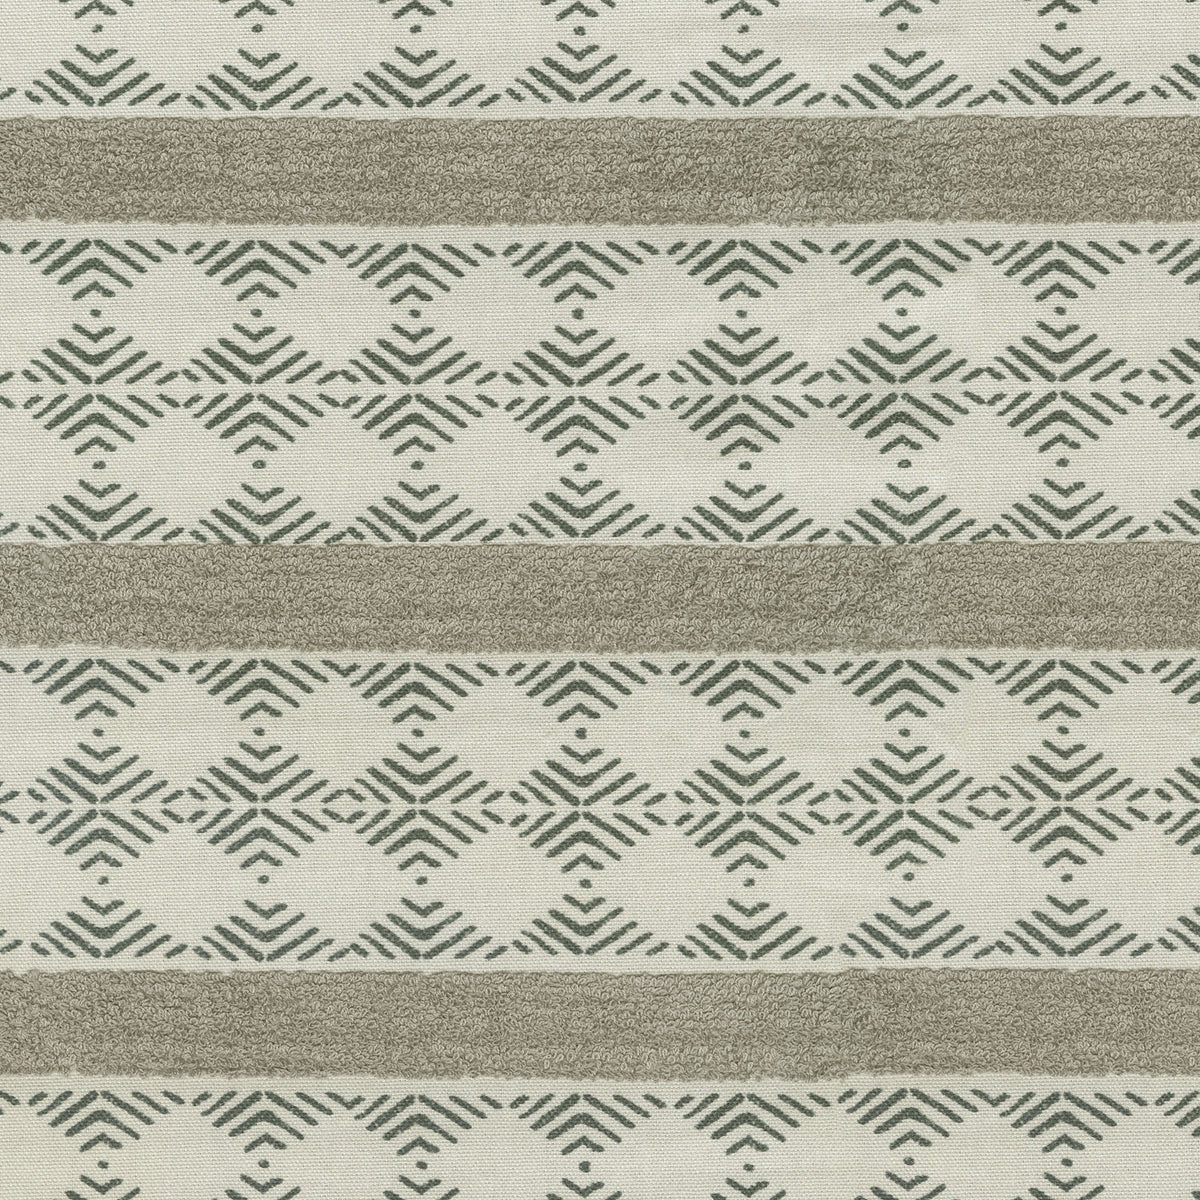 P/K Lifestyles Stitched Patch - Cloud 410132 Fabric Swatch